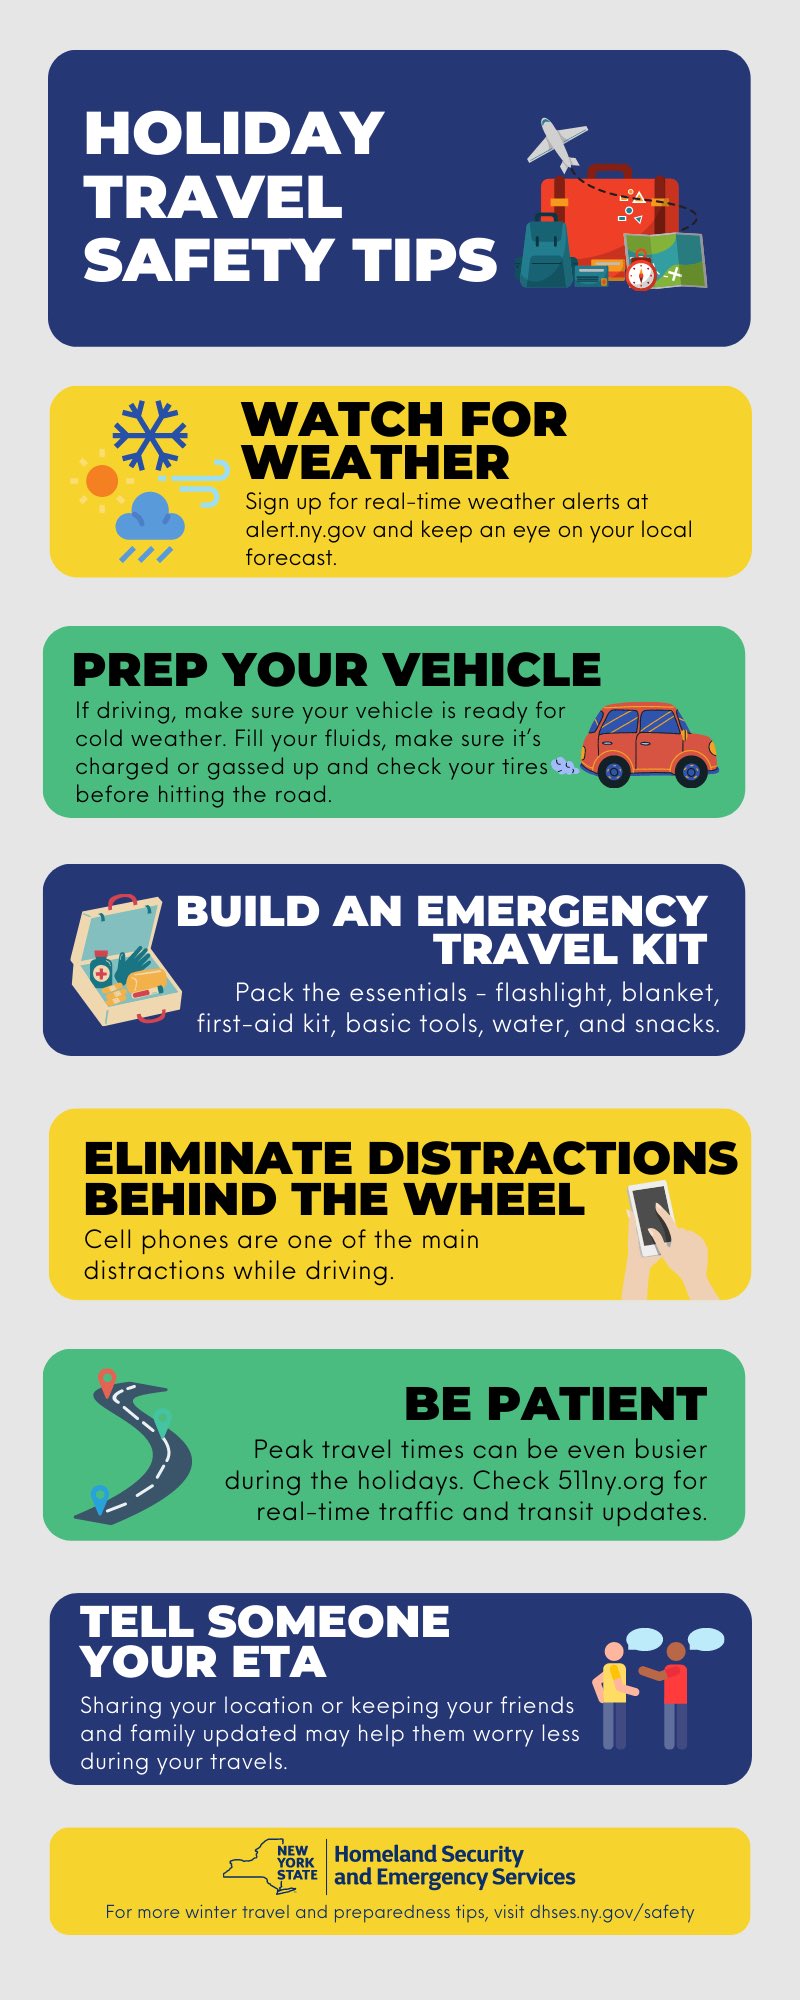 Travel Safety Tips—No Matter Where In The World You're Going